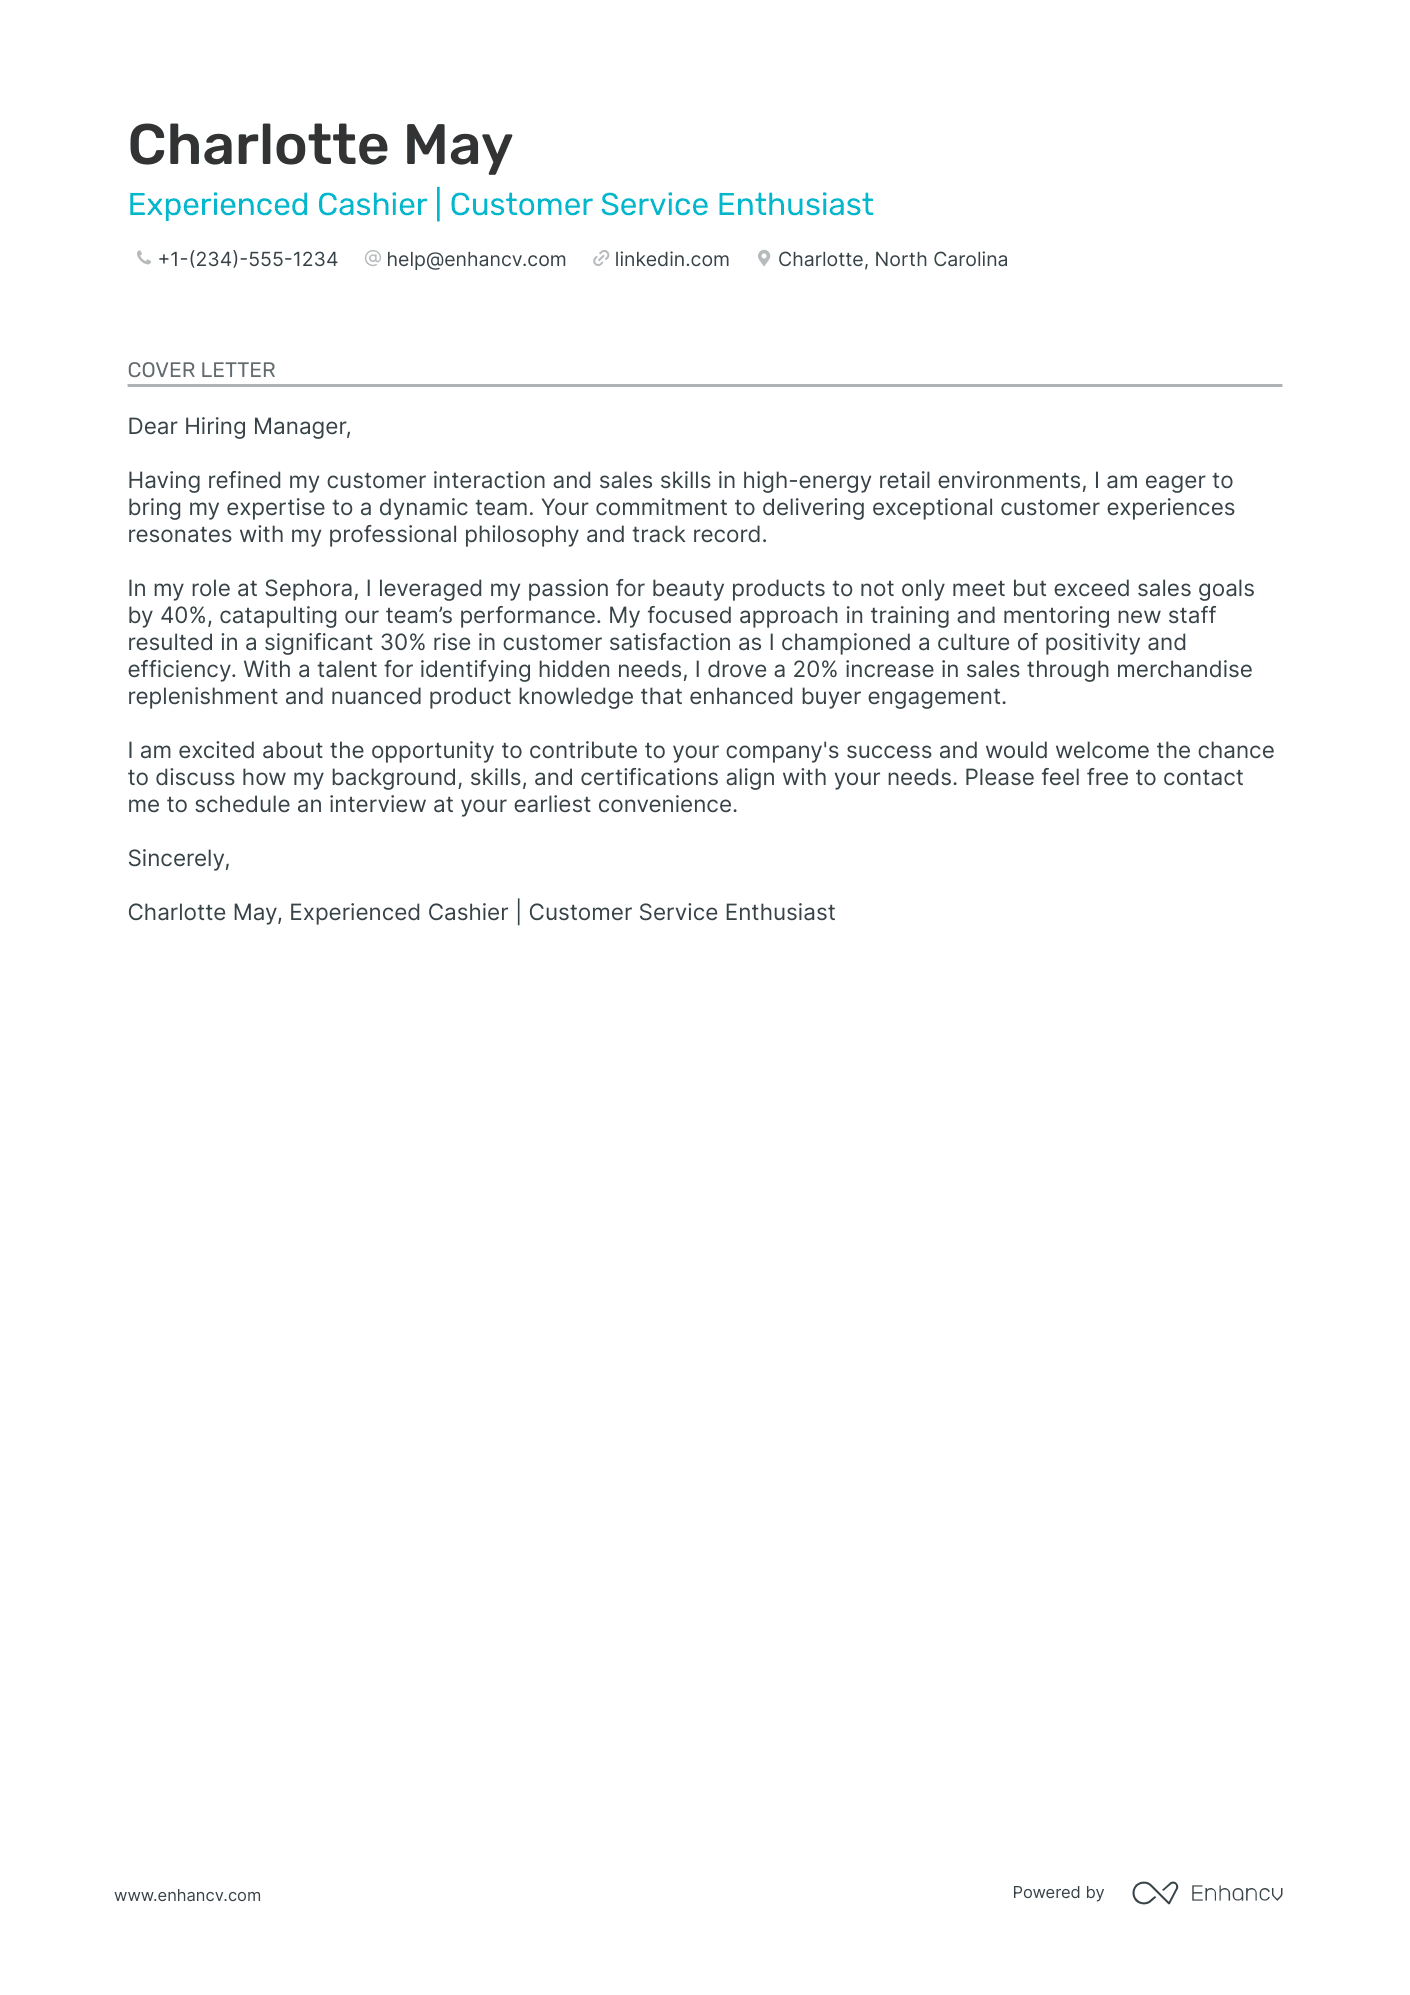 sample cover letter for cashier position with experience